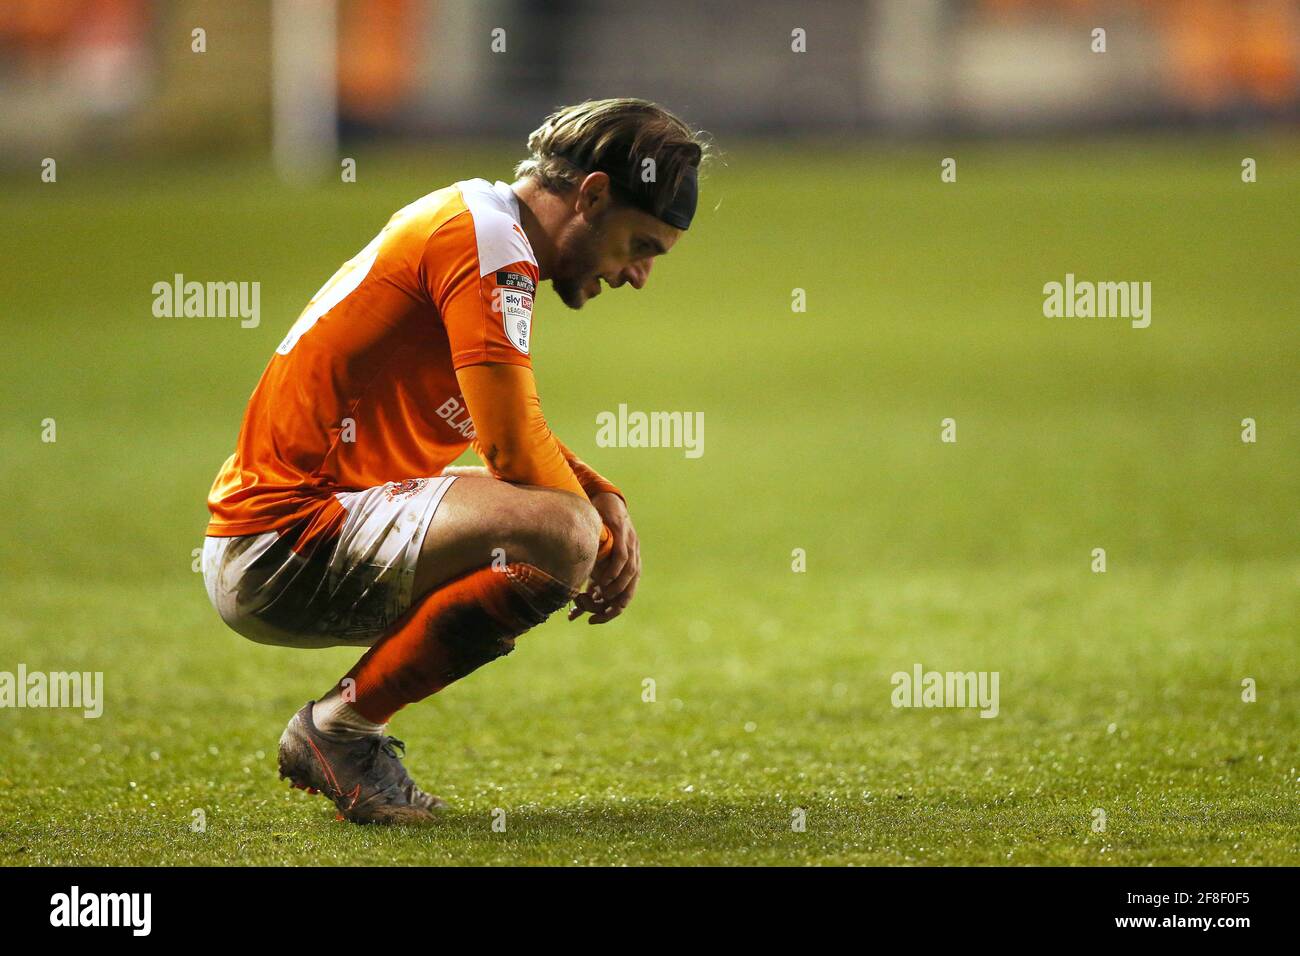 Blackpool, UK. April 13 2021: Blackpool Luke Garbutt reacts after the full time whistle. Credit: Anthony Devlin/Alamy Live News Stock Photo